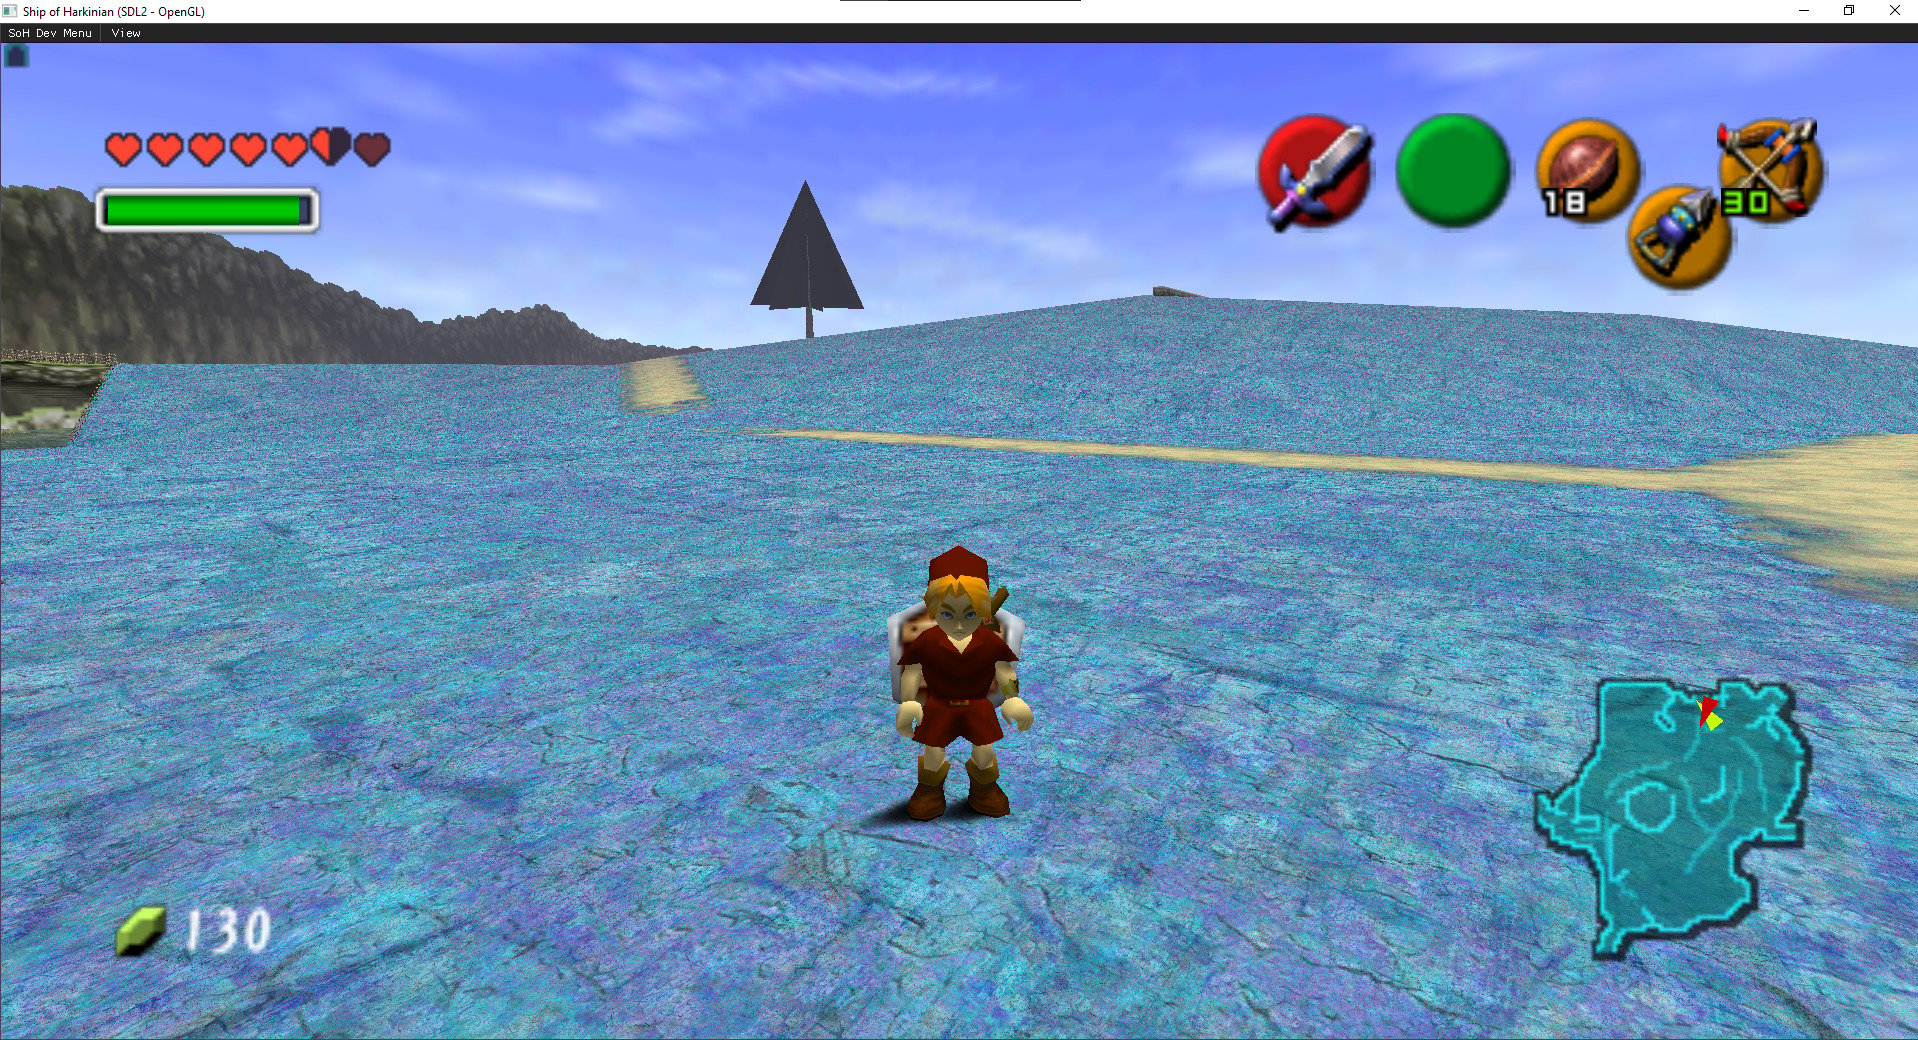 Zelda Ocarina of Time PC modders add support for better graphics